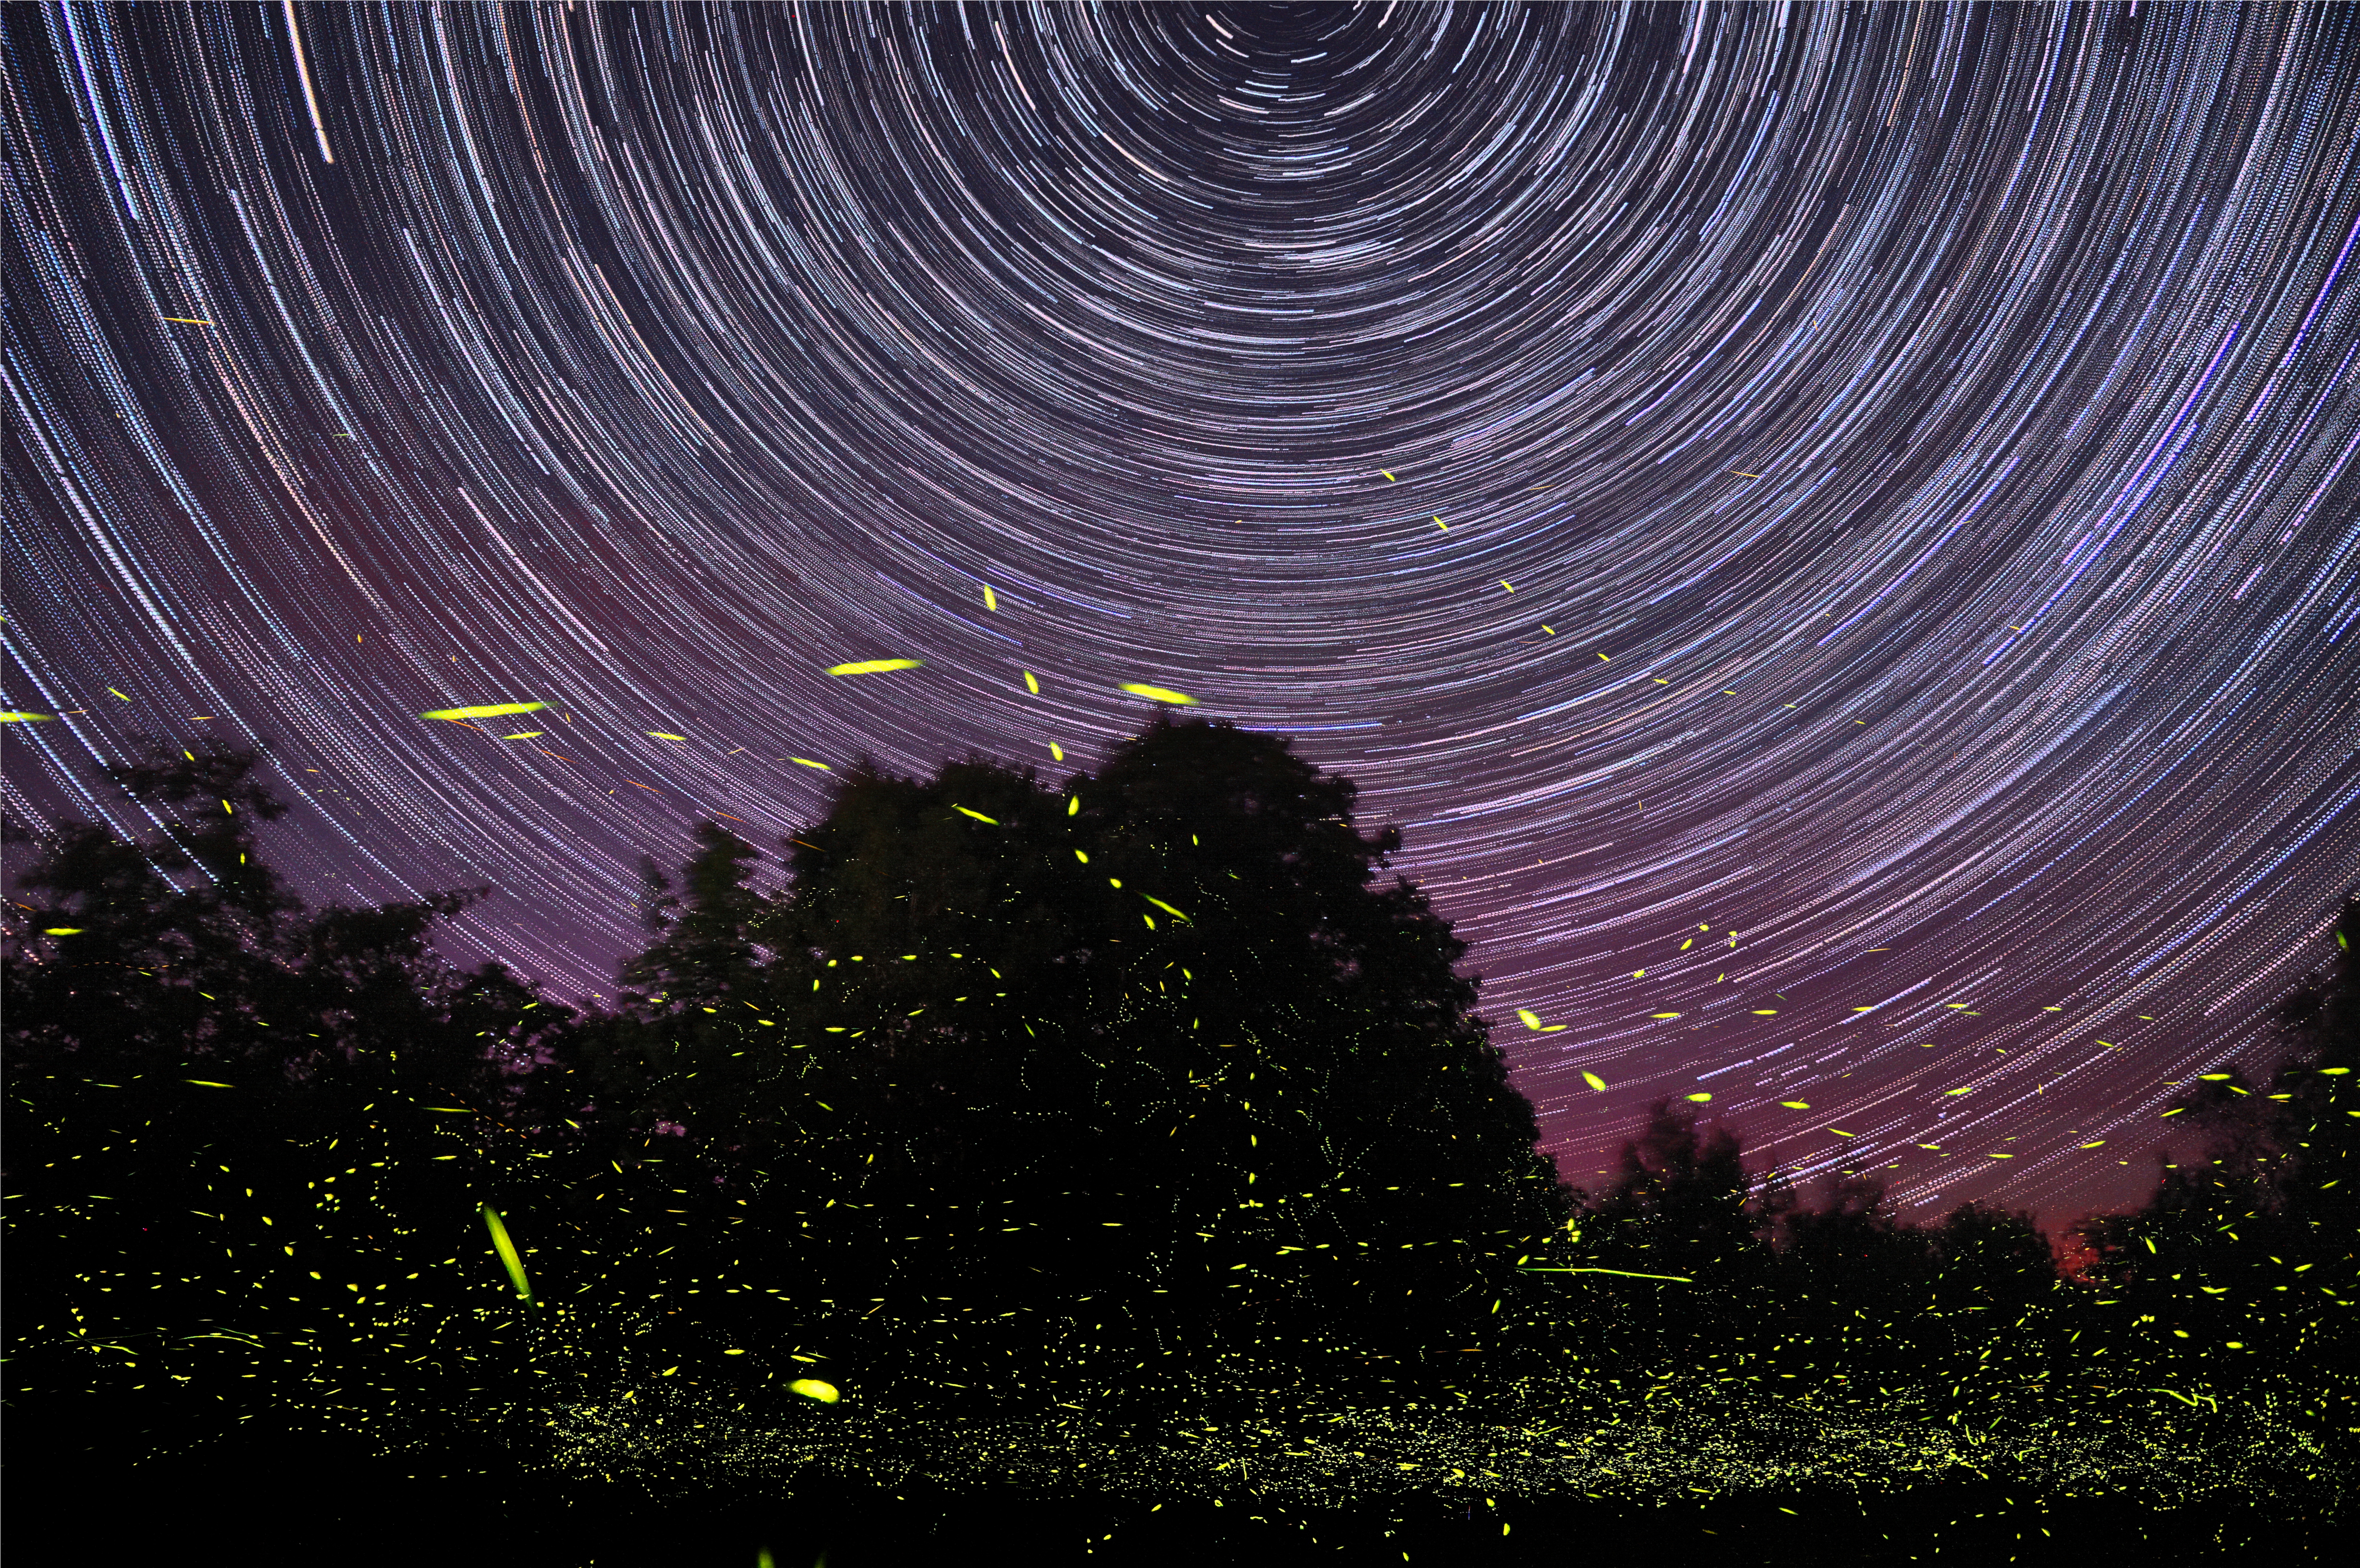 White, circular star trails inscribe a purple and maroon night sky, and the dark areas of the scene that include tree silhouettes are illuminated by yellow-green firefly trails, in this long-exposure shot.